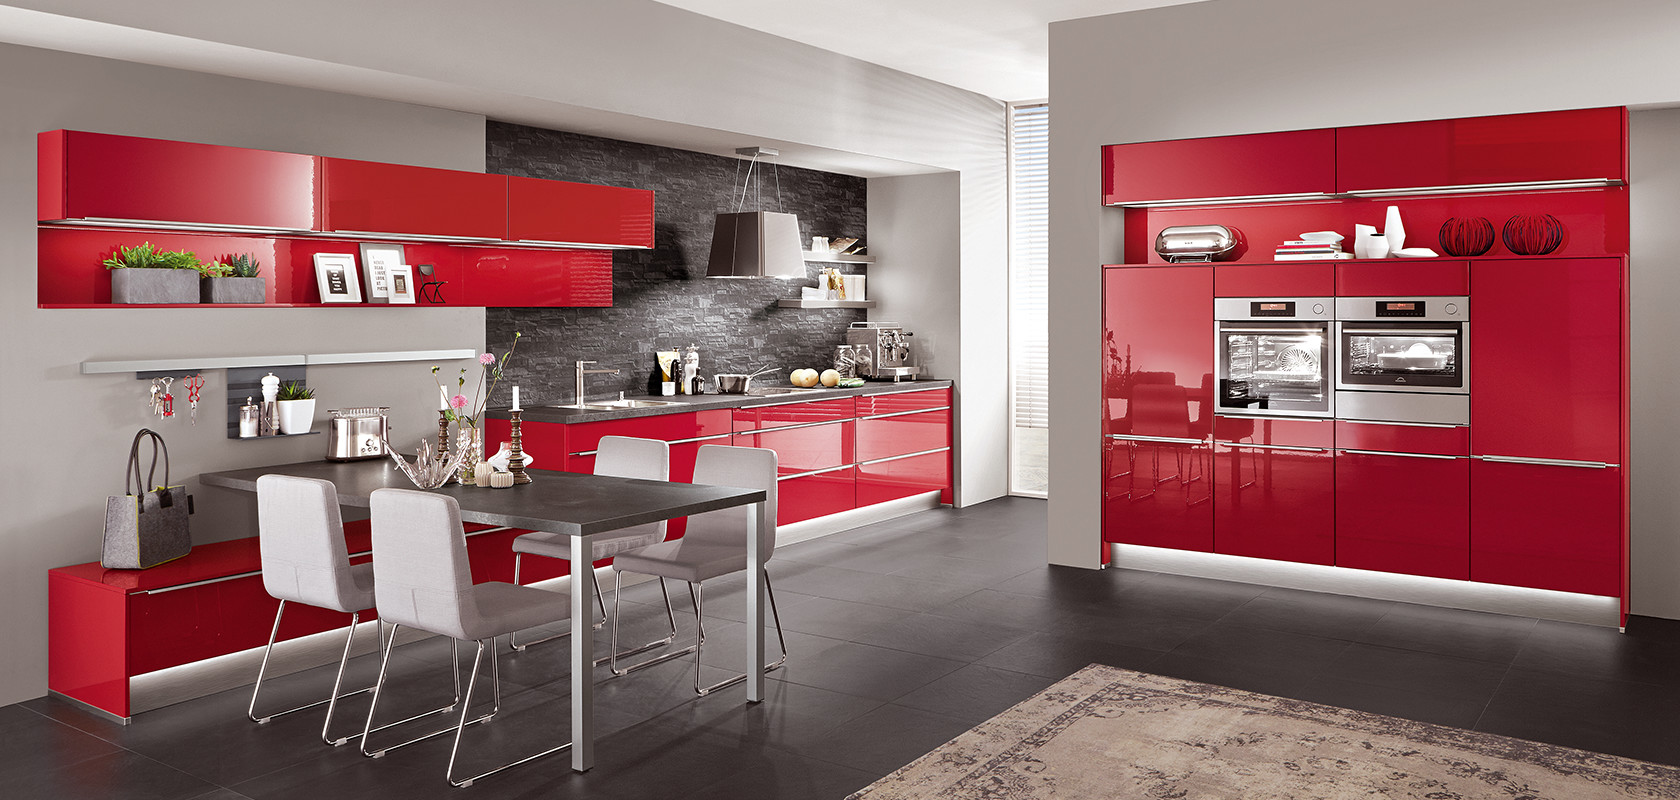 This kitchen in Red high gloss lacquered laminate is a clear affirmation of colour and a real eye-catcher in every flat. Indeed, uprights and top shelves were combined in the same shade and made from the same material. The only accents necessary are the beautifully harmonised stainless steel coloured bar handles and the worktop in Black granite décor.